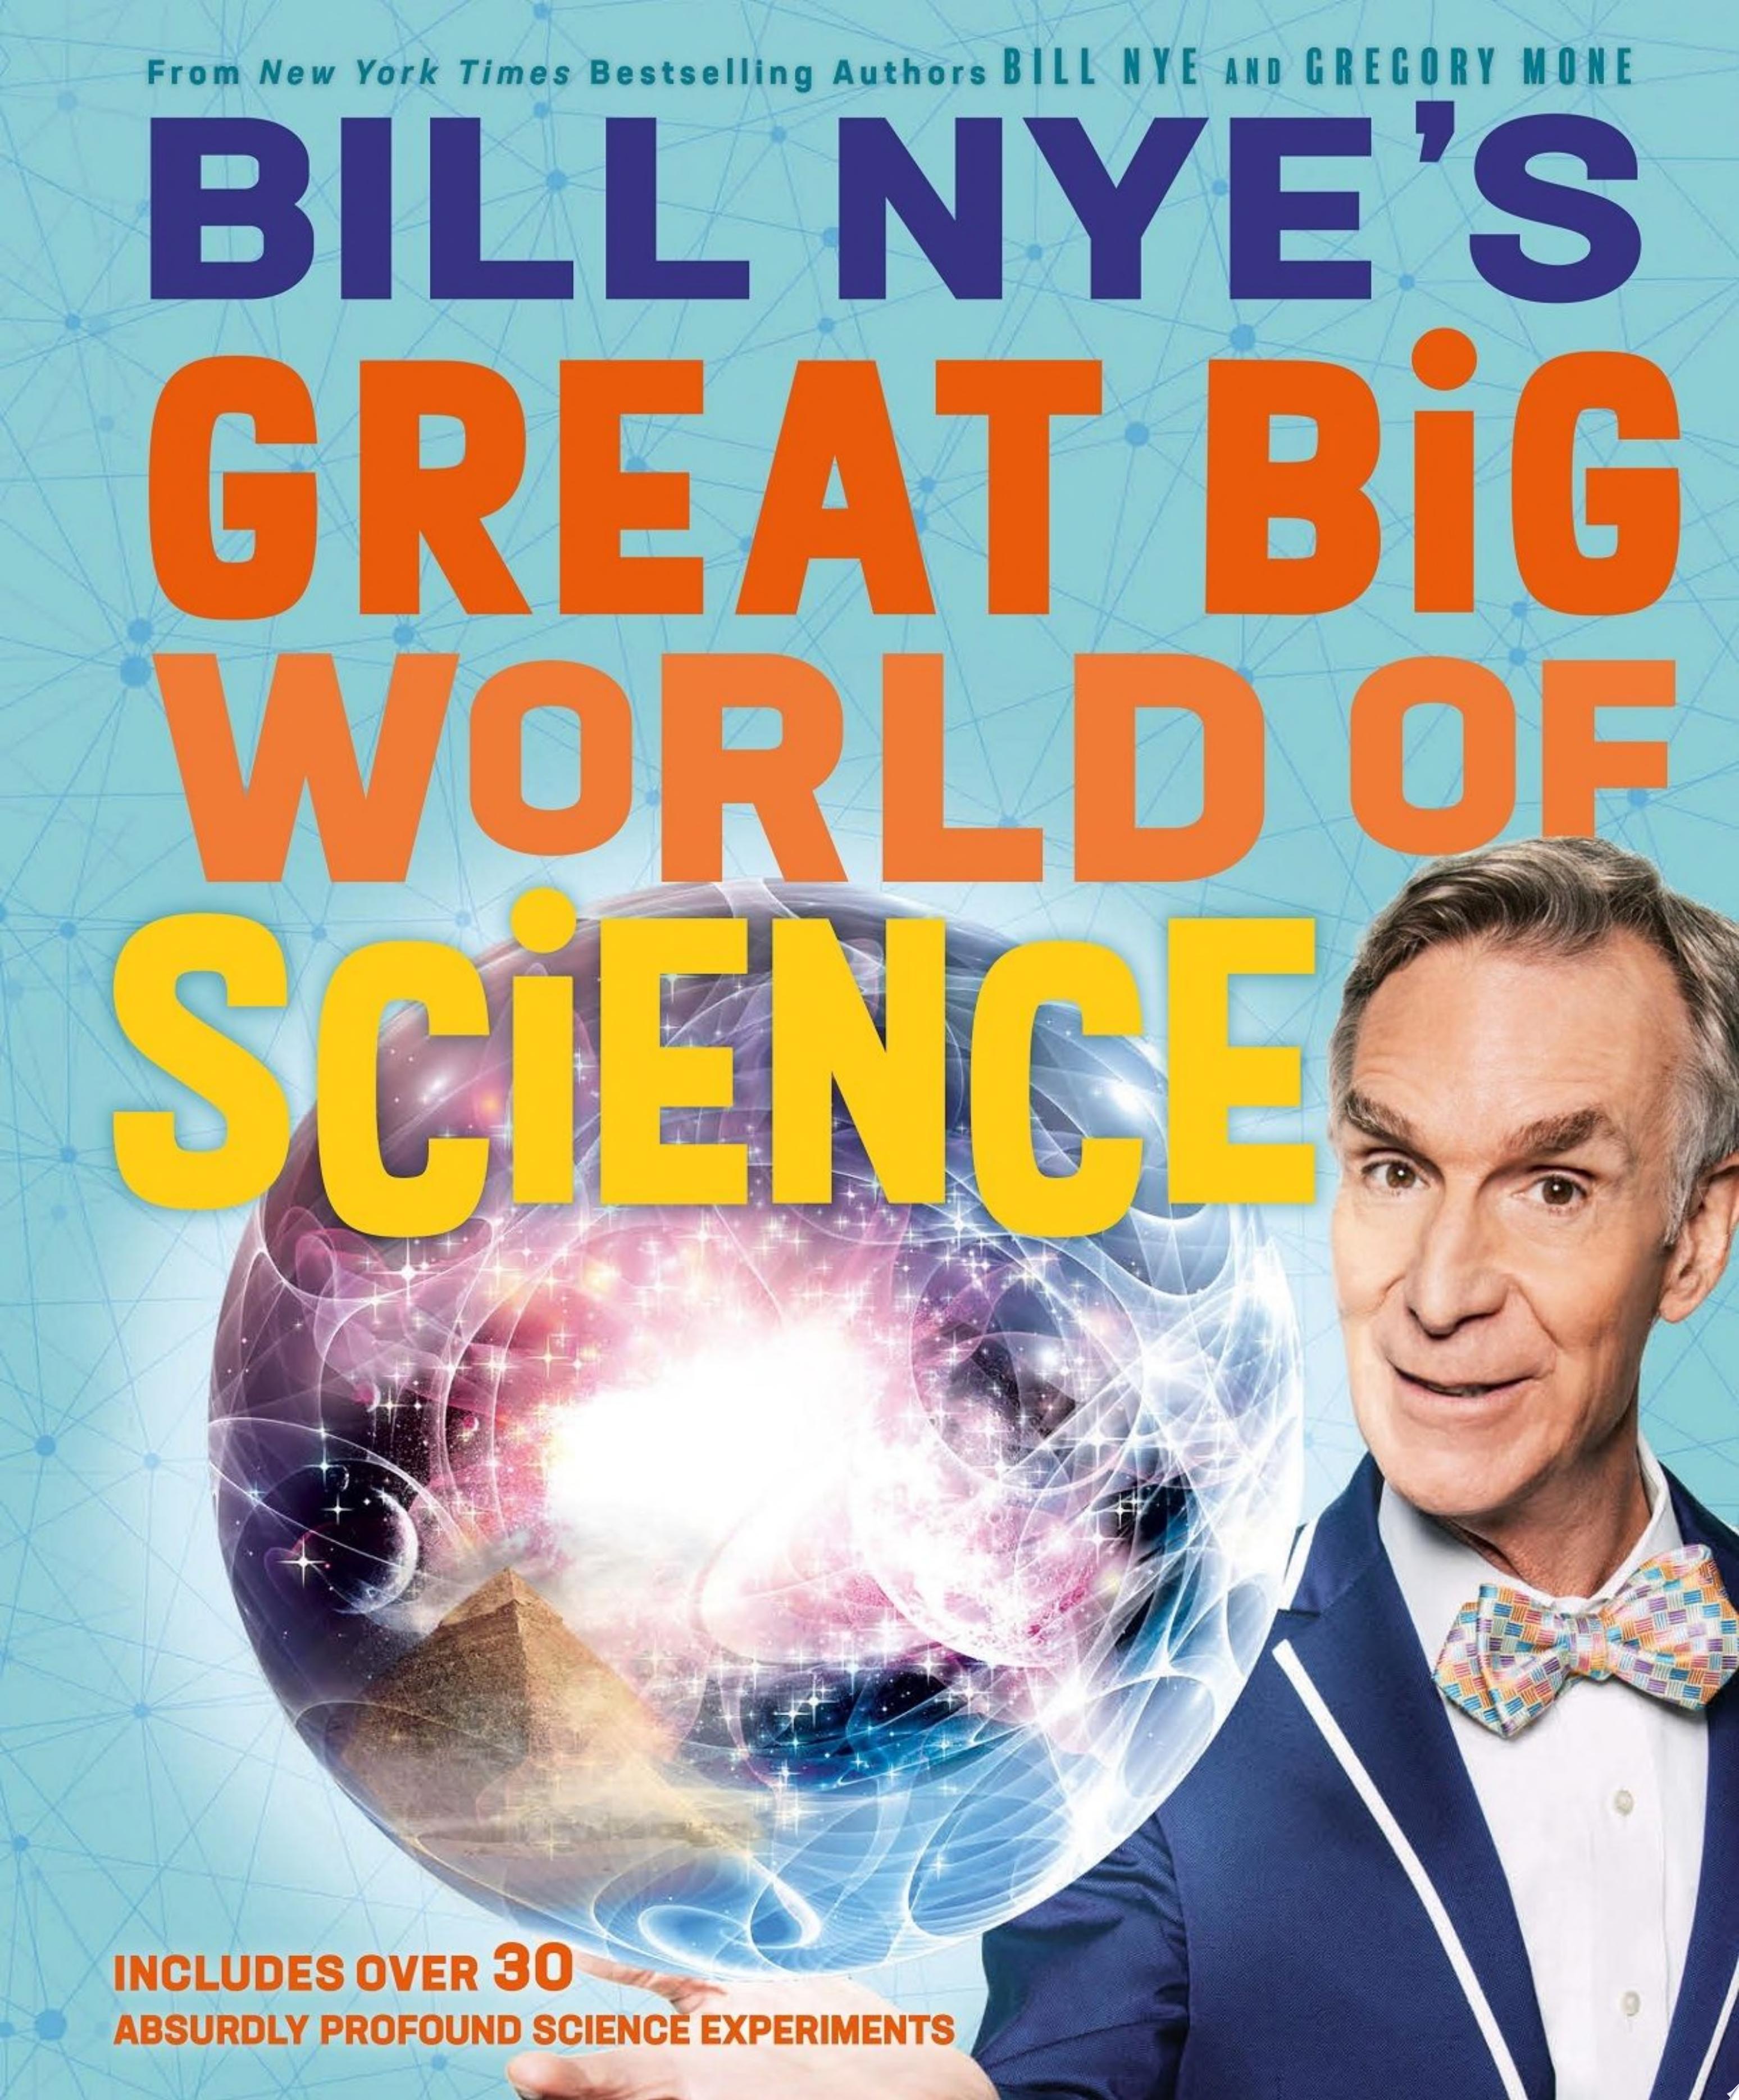 Image for "Bill Nye's Great Big World of Science"